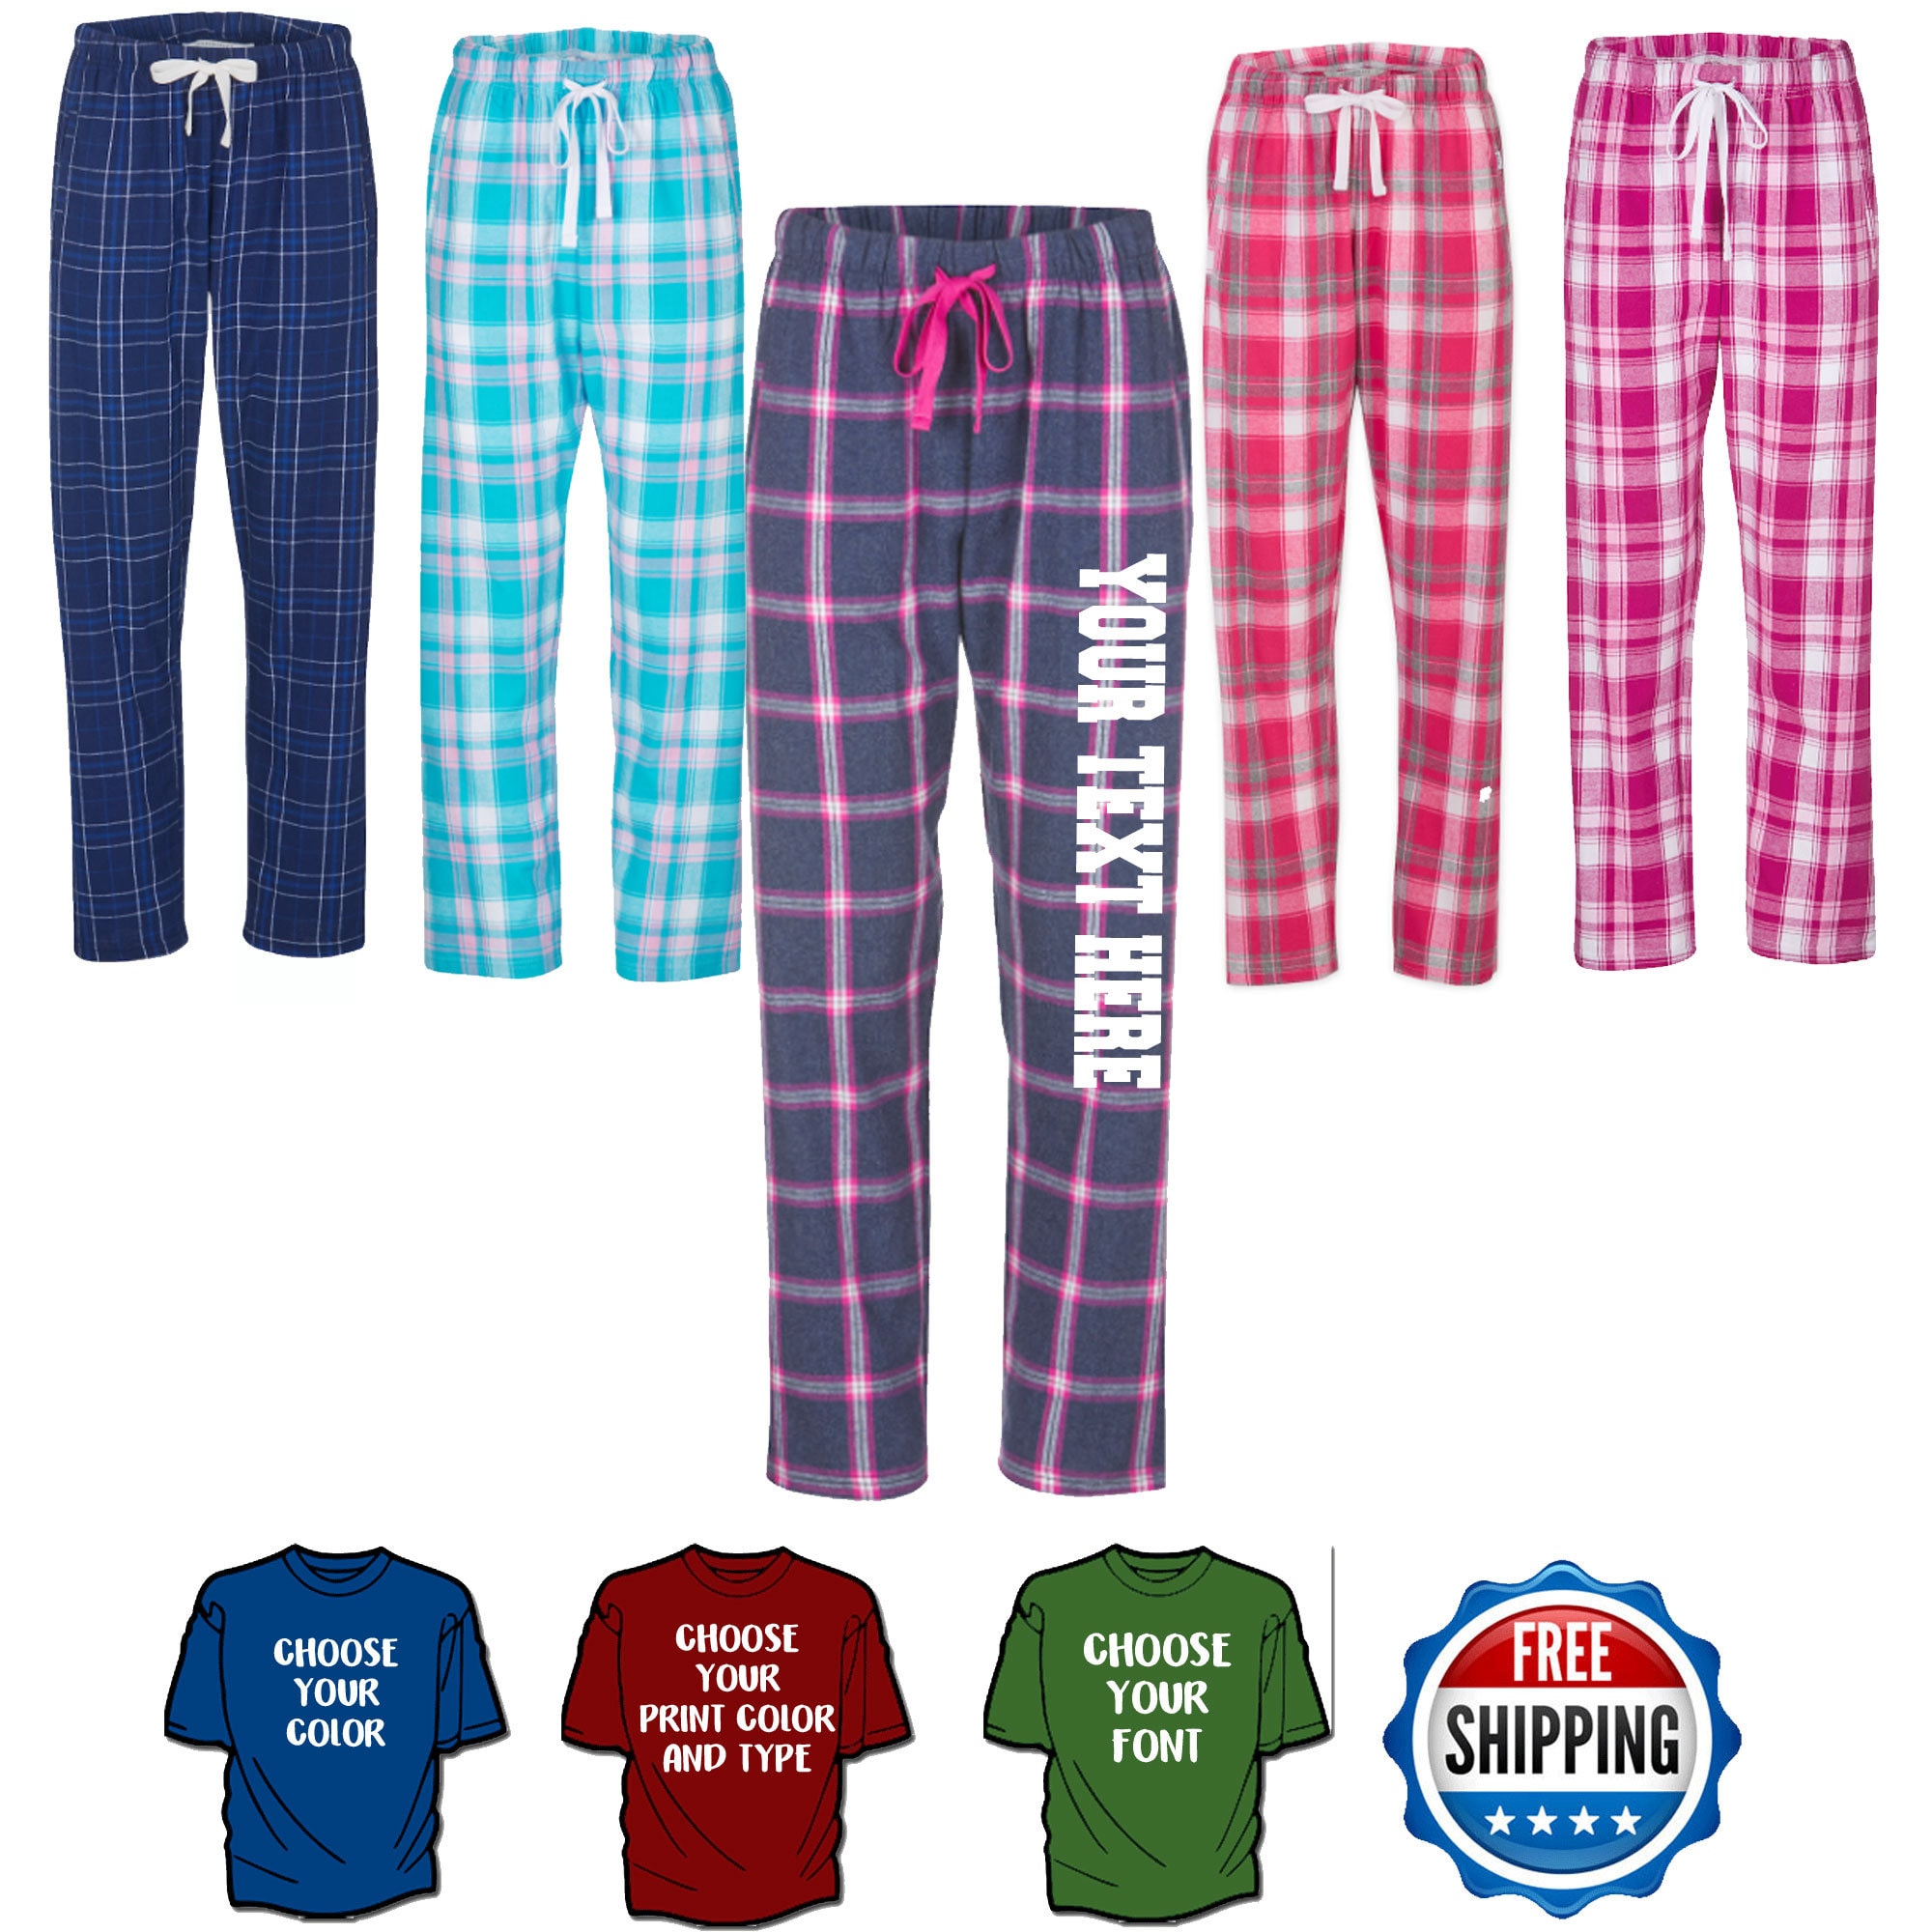 Relaxed Fit Pajama Pants - Blue/checked - Men | H&M US